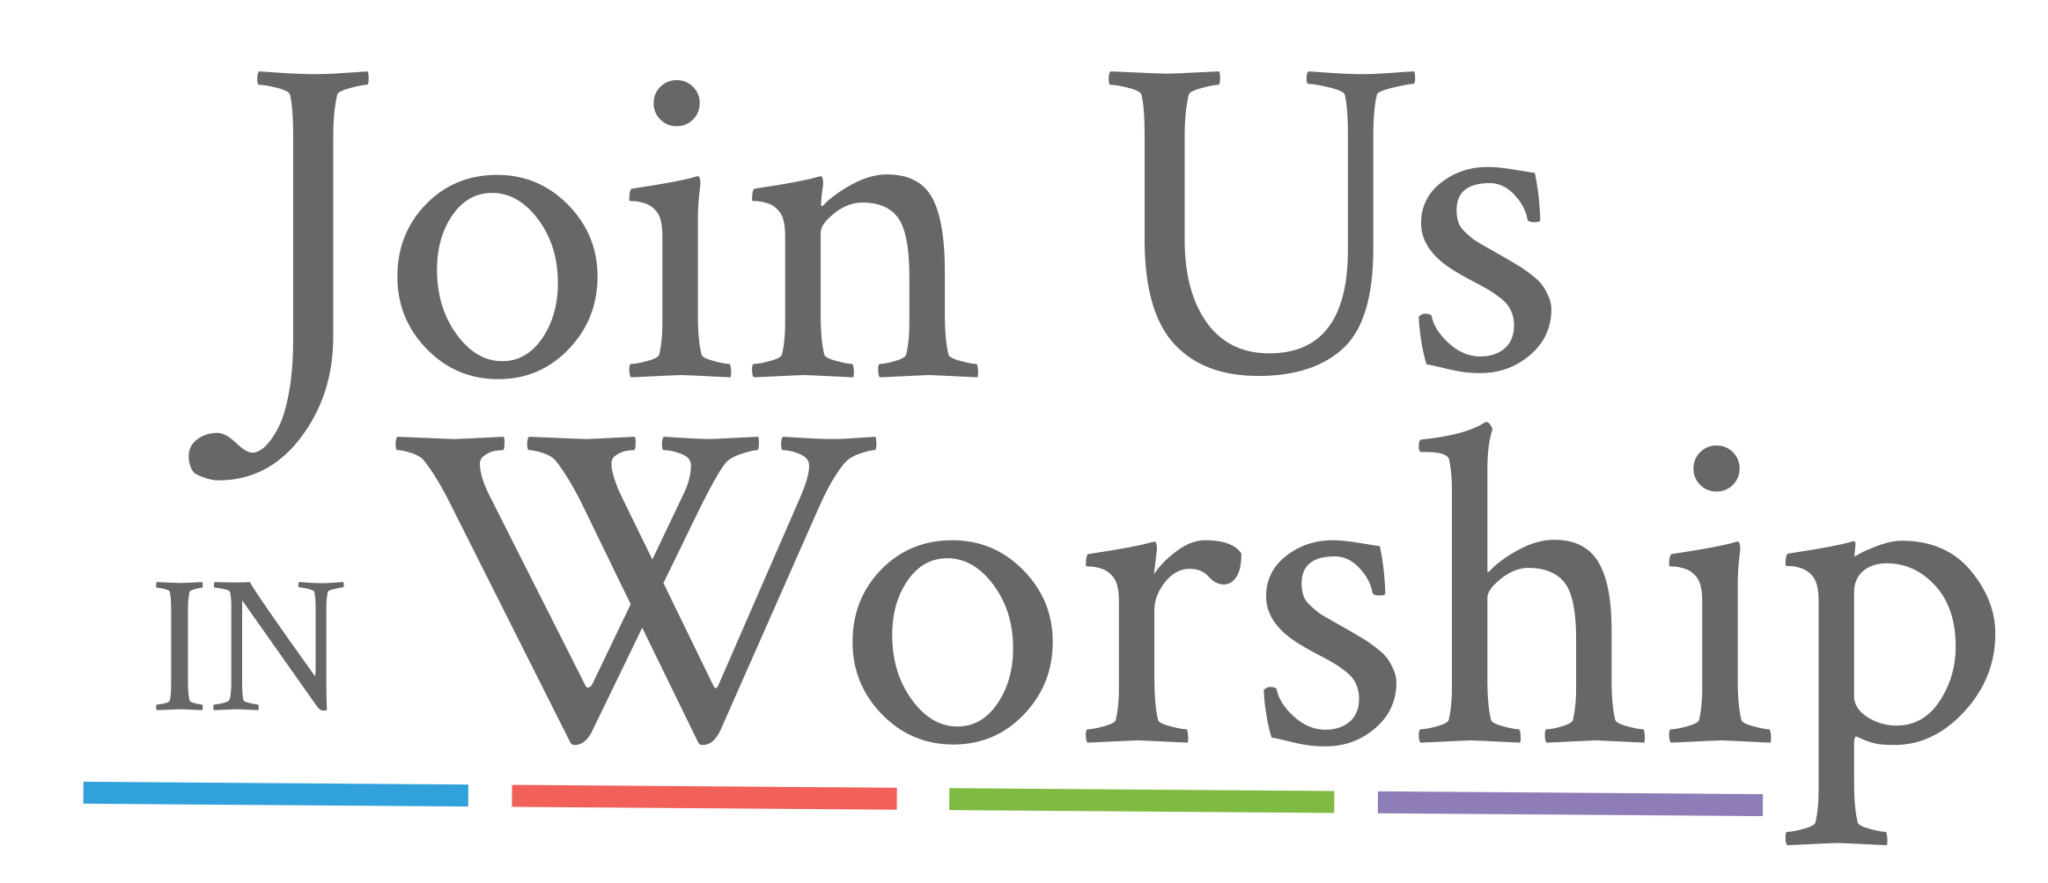 Join-us-in-worship-1